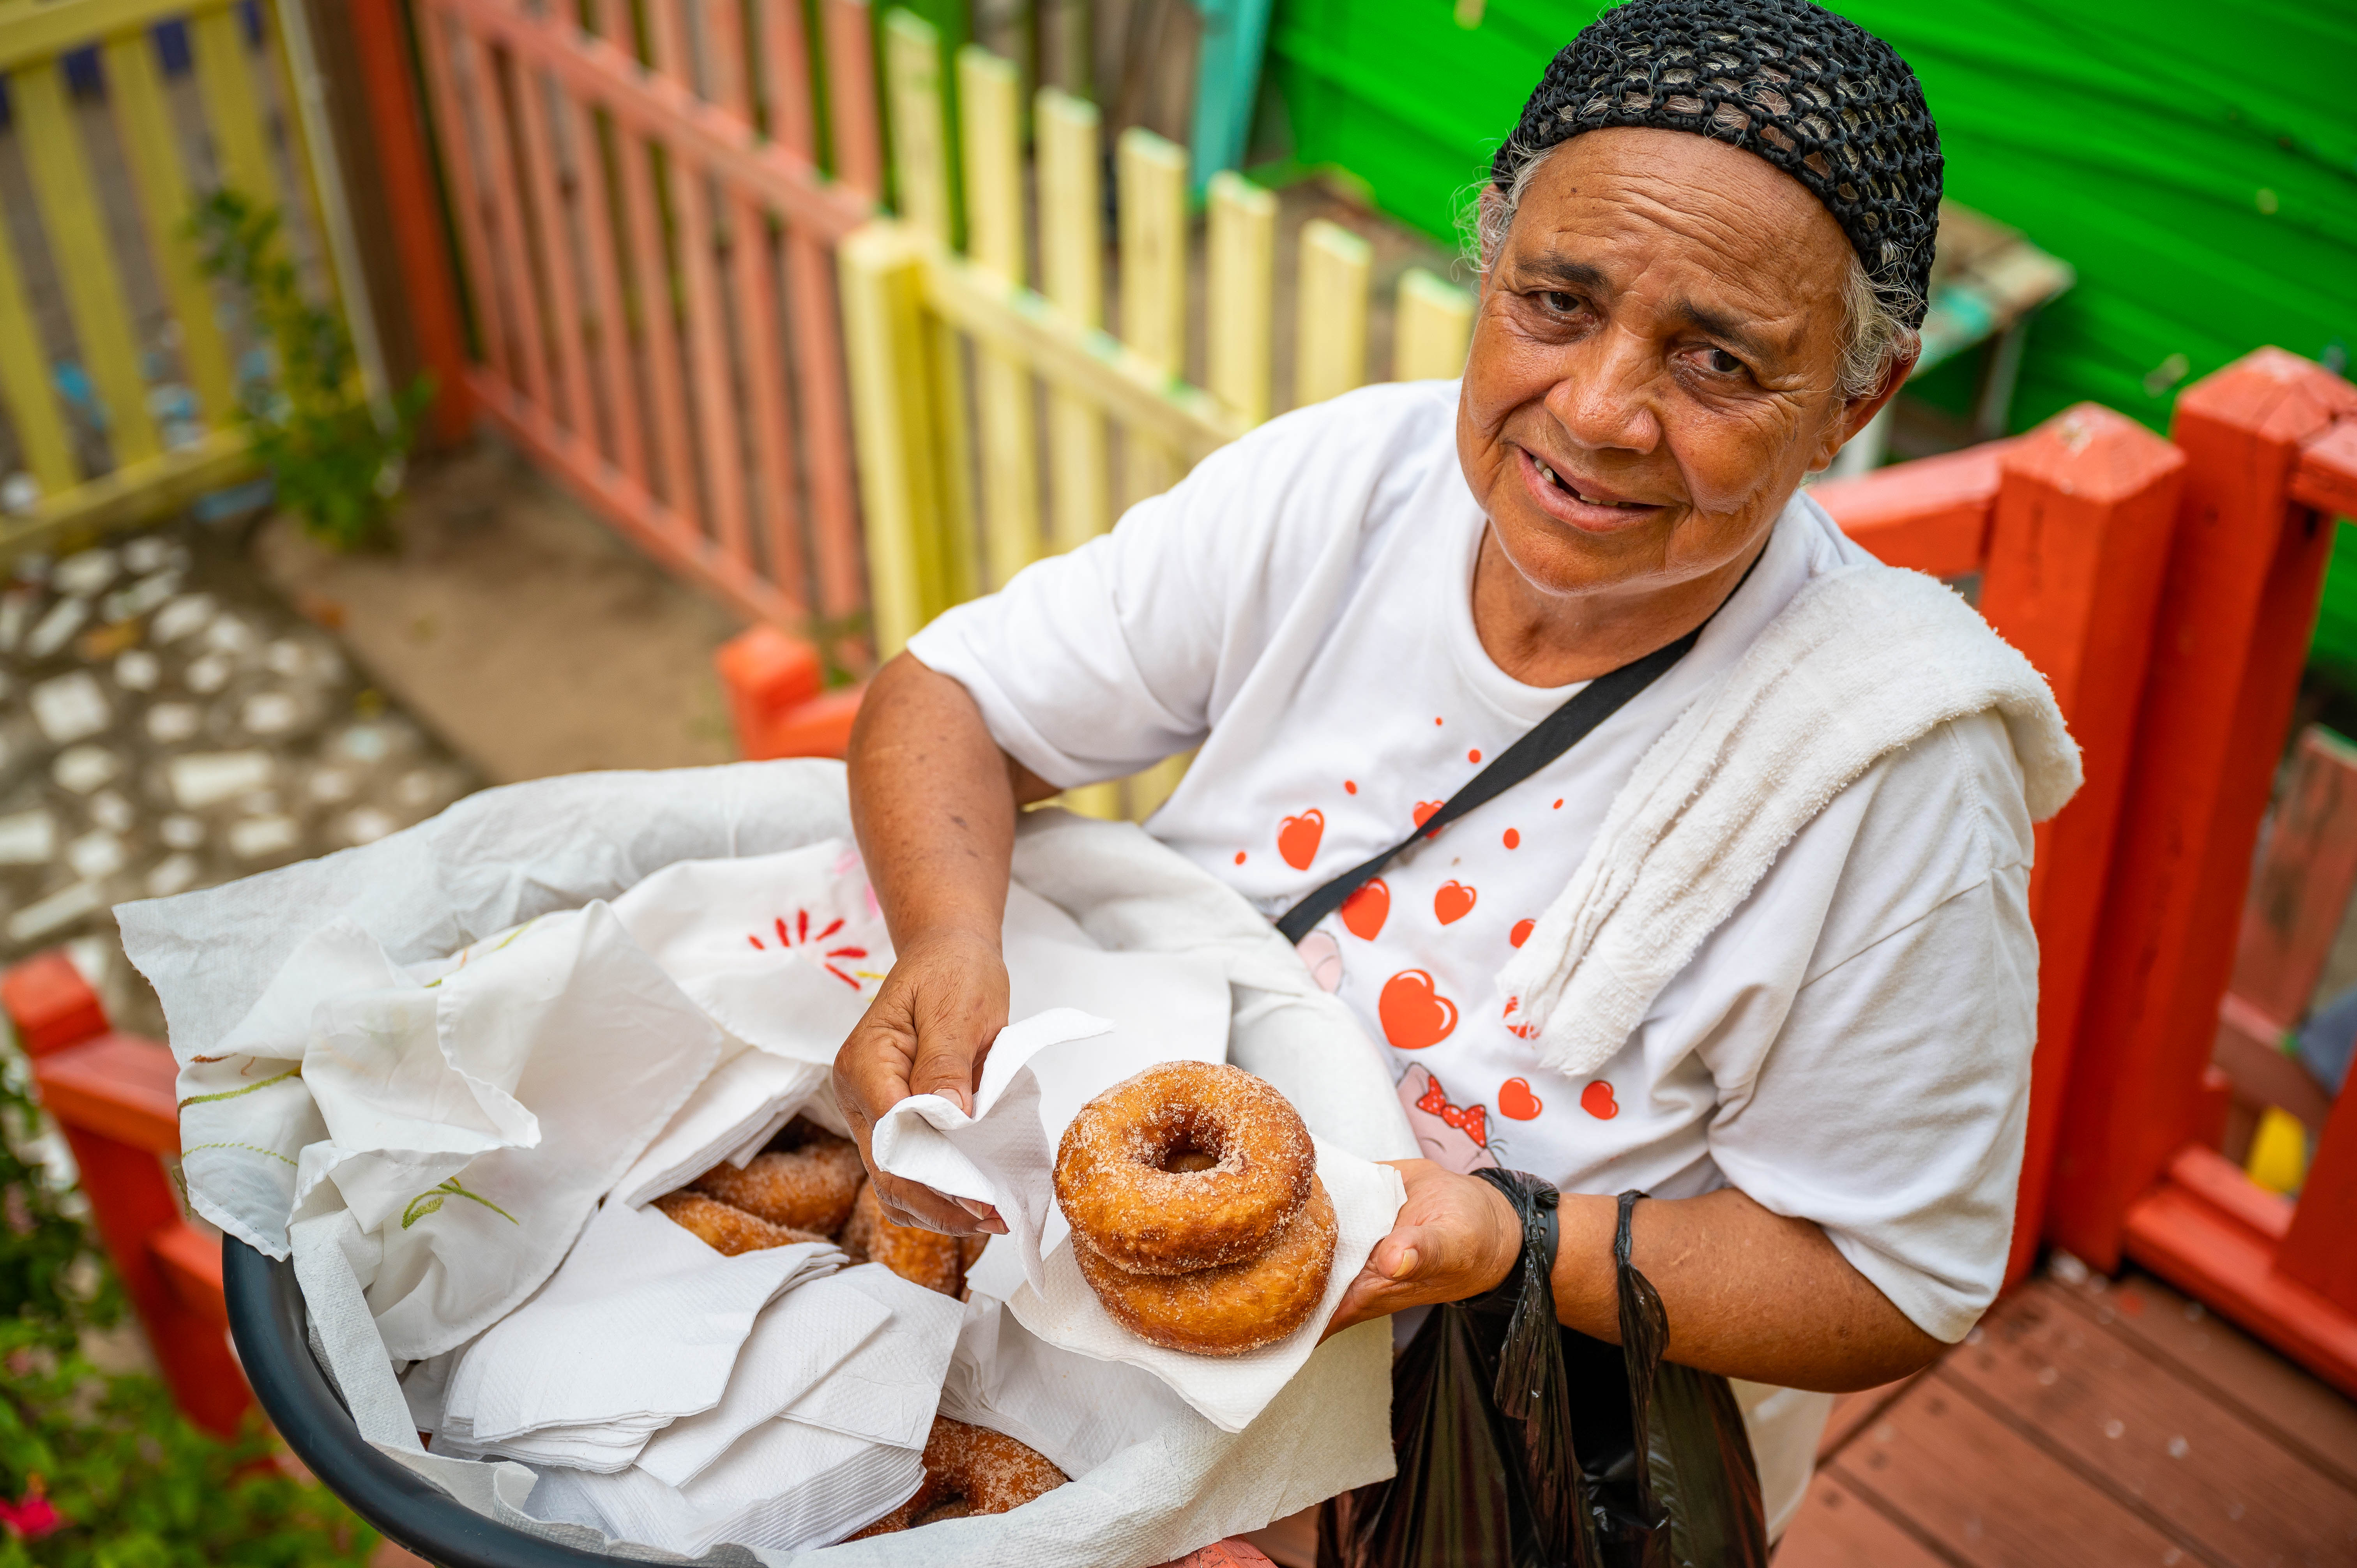 Doughnuts from Miss Reina, Placencia, Belize